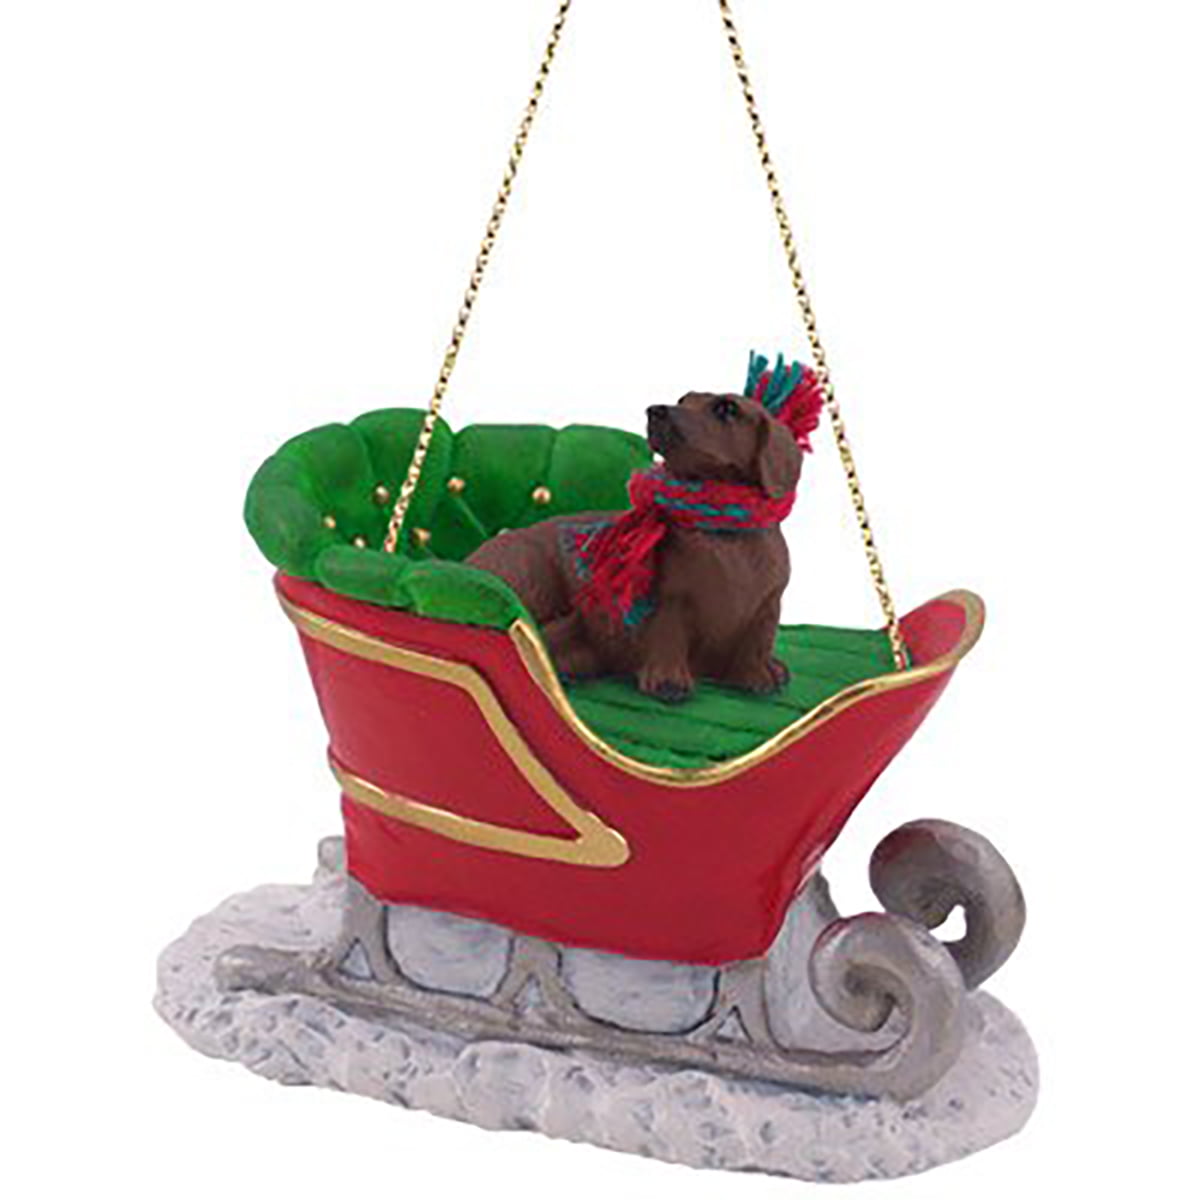 Conversation Concepts Red Dachshund Dog Sleigh Dog Holiday Ornament